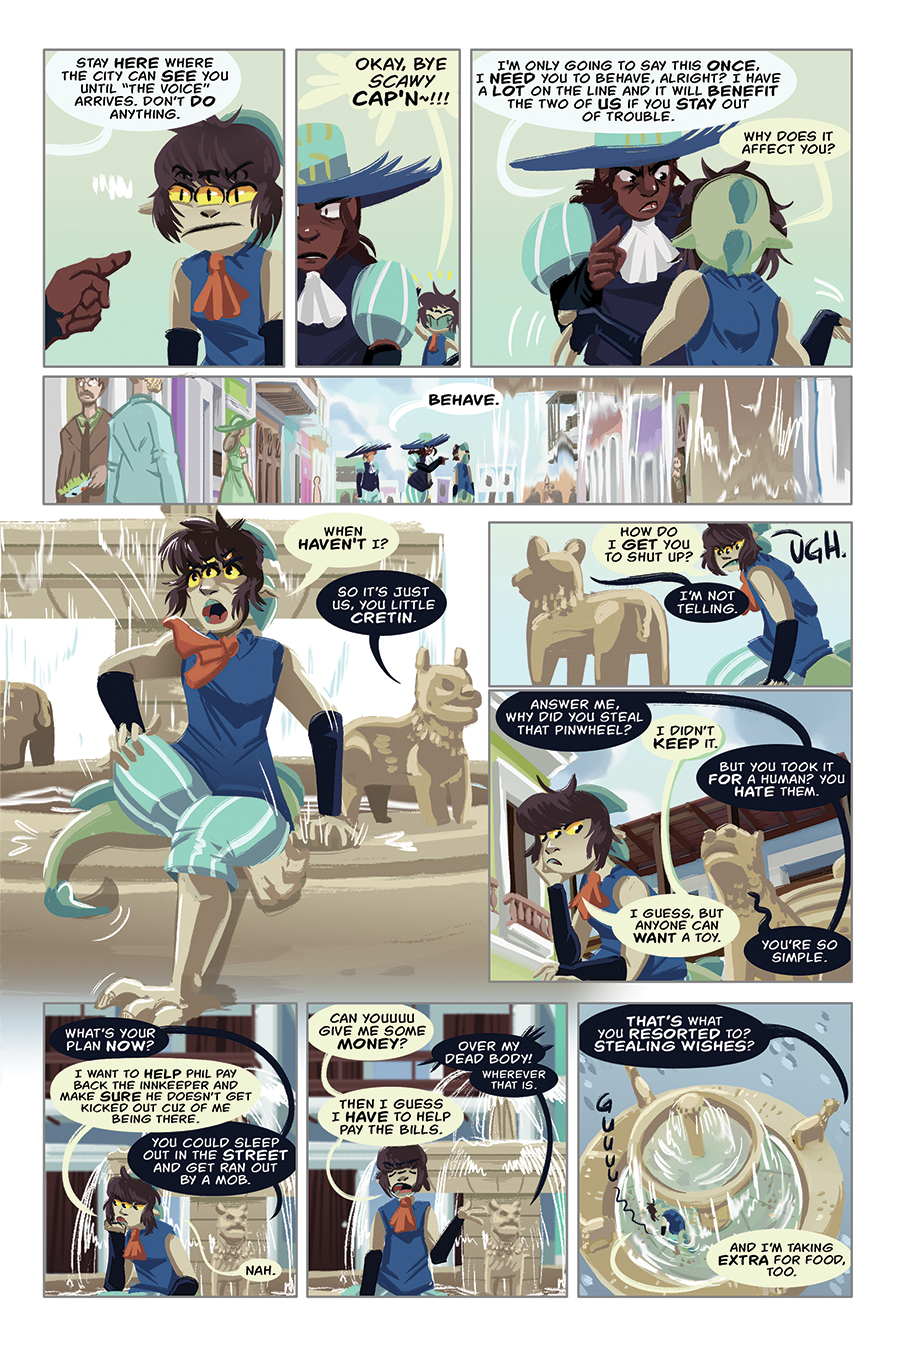 Chapter 8, page 9